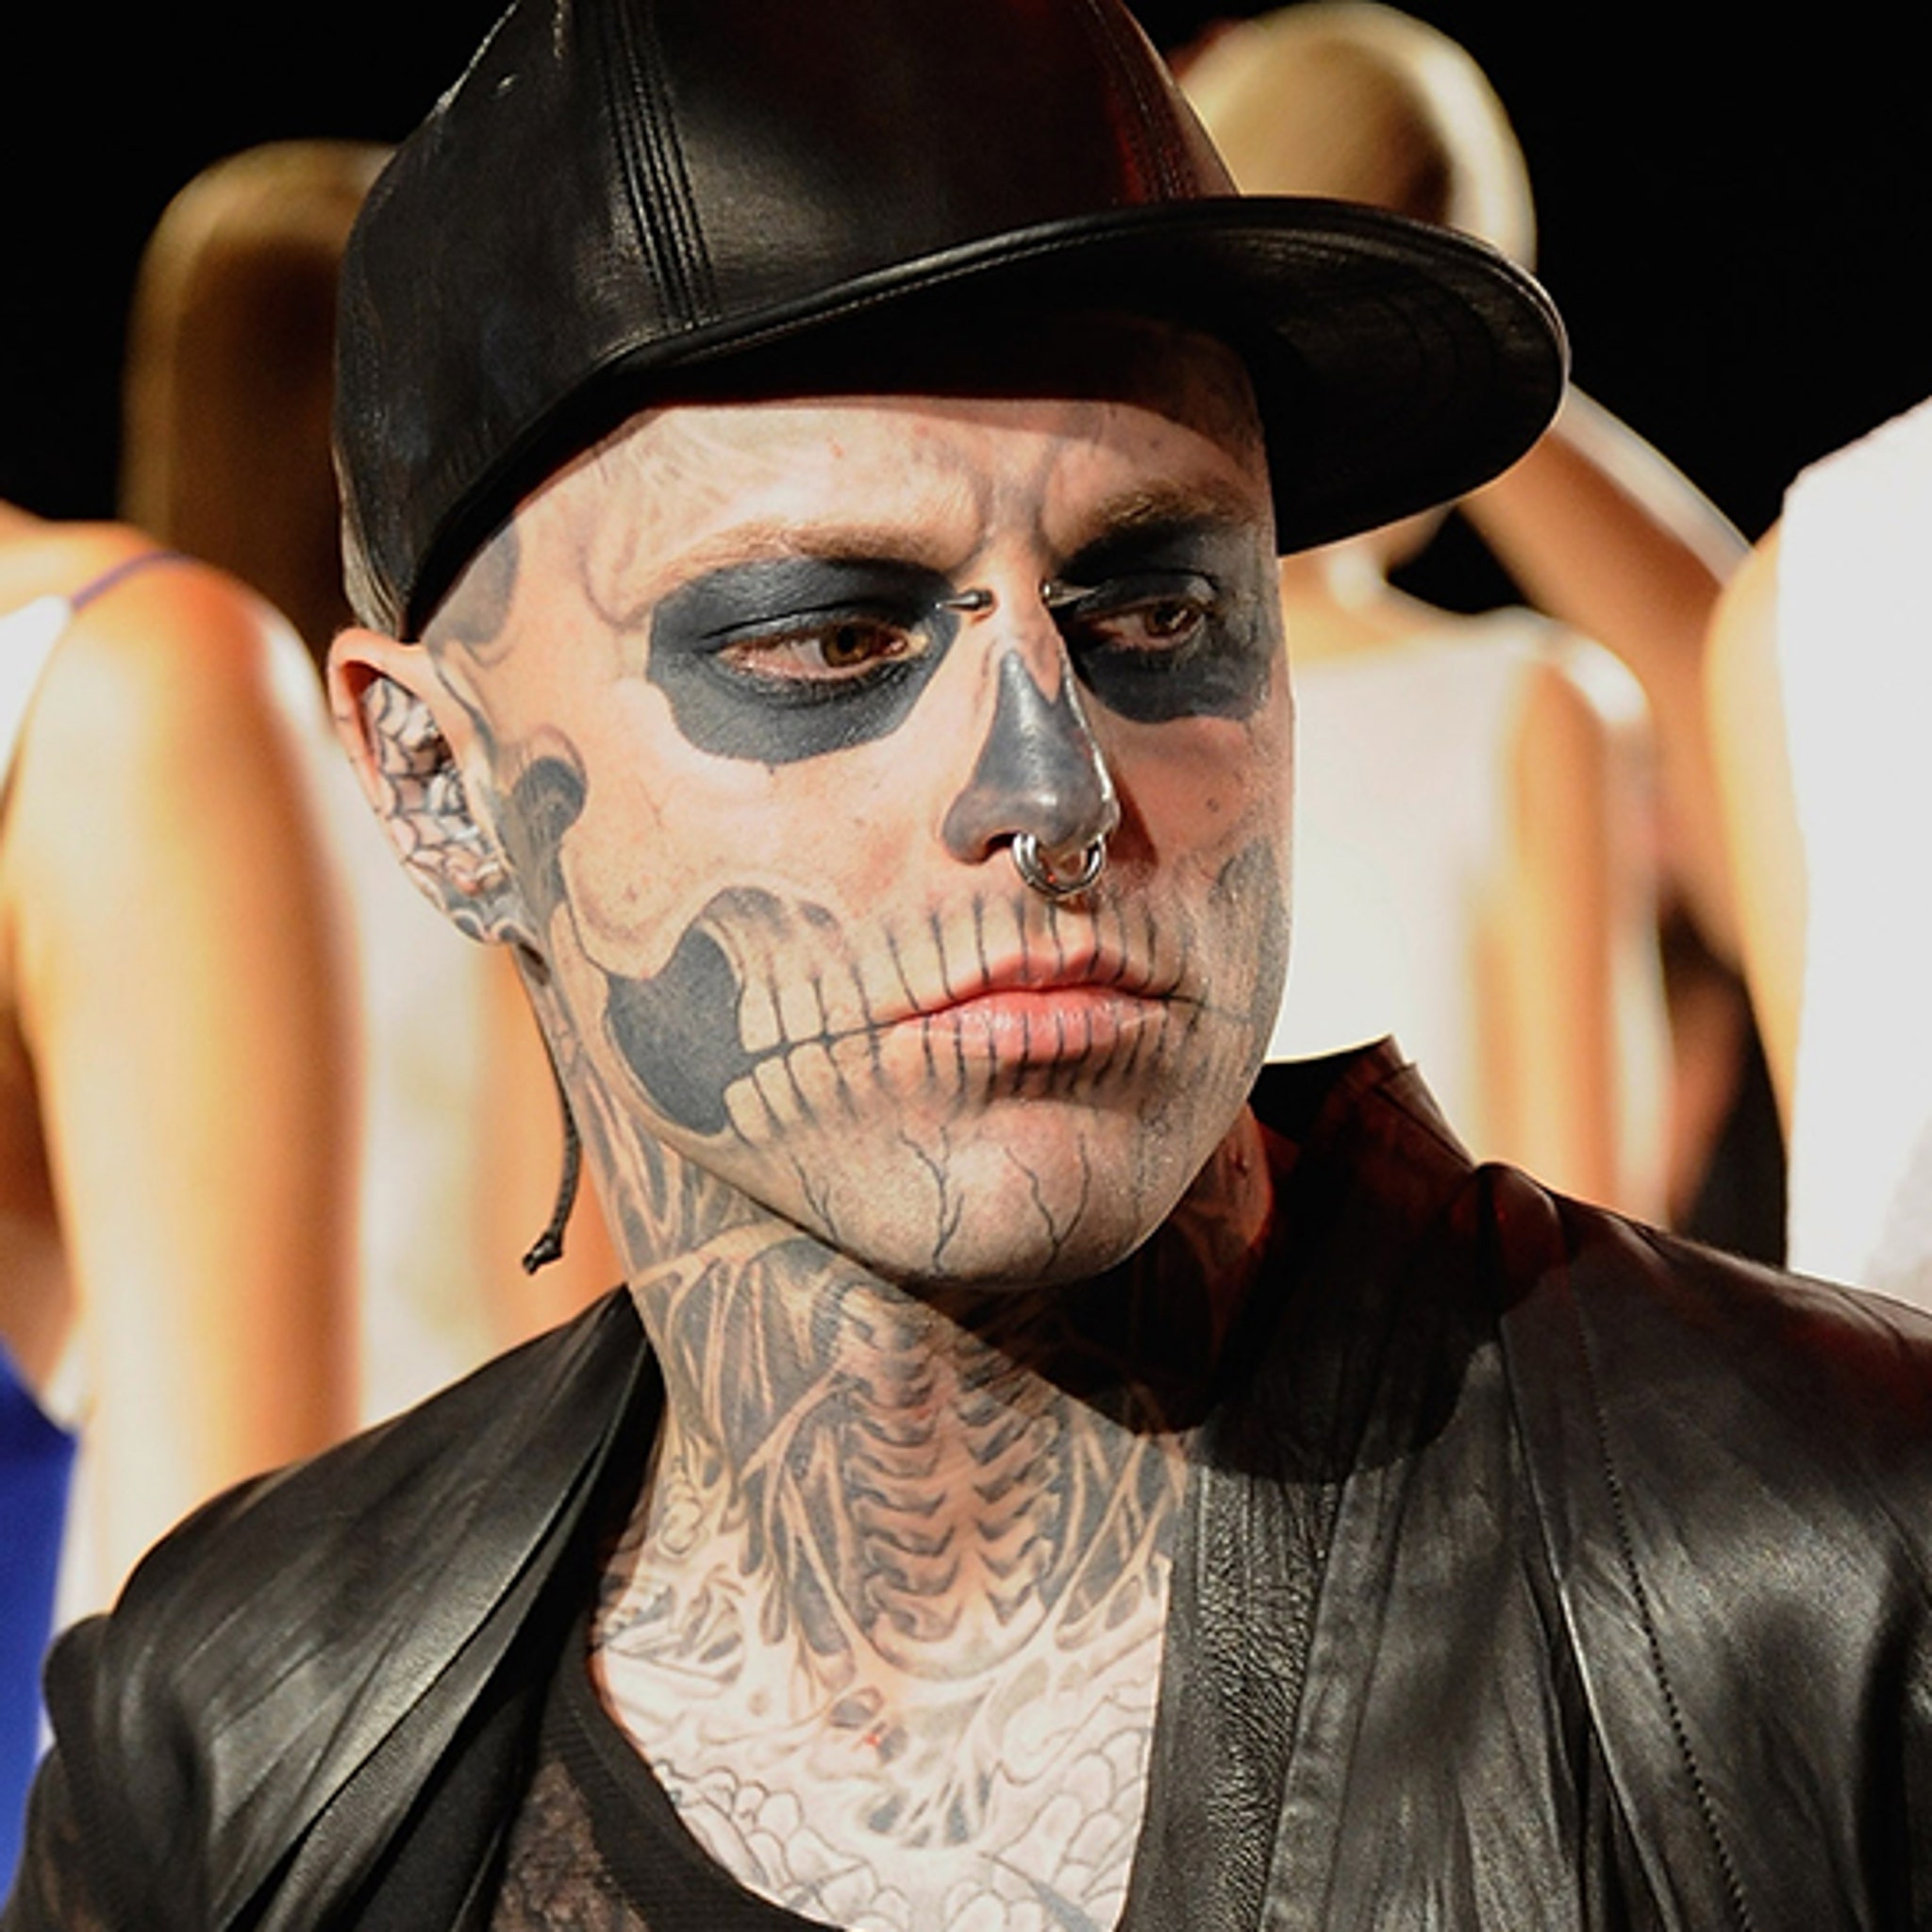 Zombie Boy from Gaga's 'Born This Way' Jumped to Death